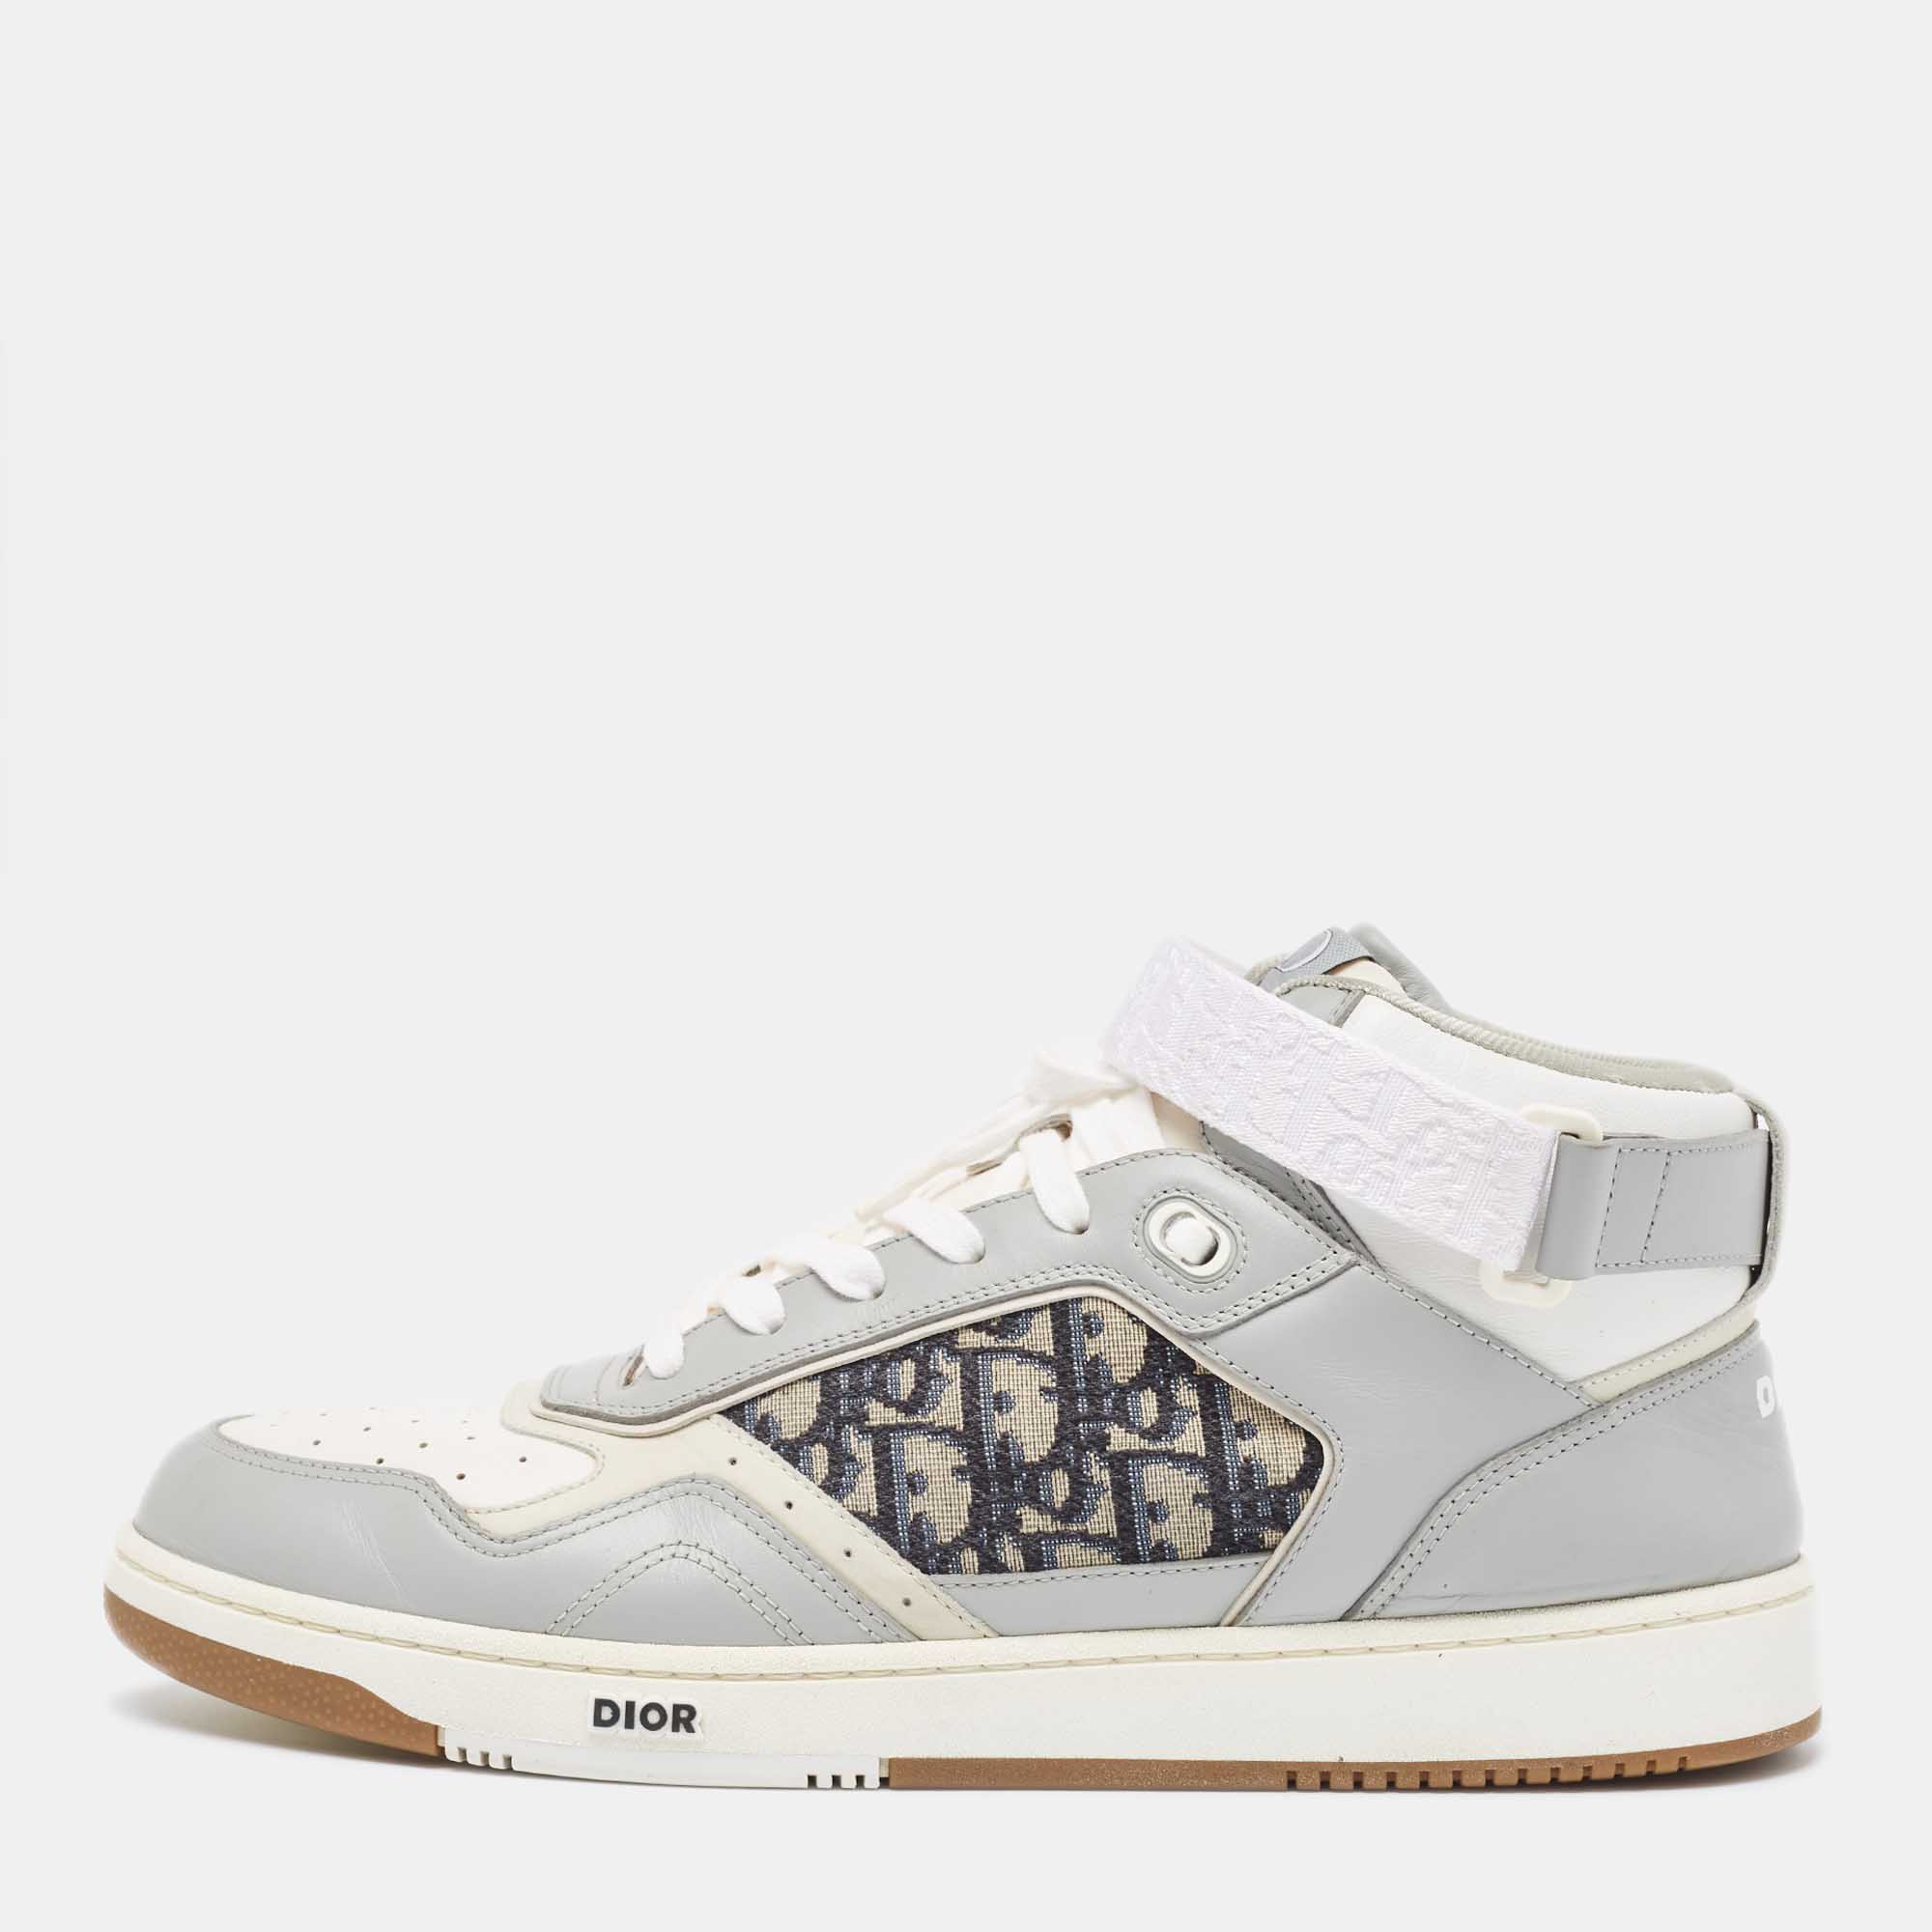 

DIOR Grey/White Leather and Oblique Jacquard B27 High Top Sneakers Size